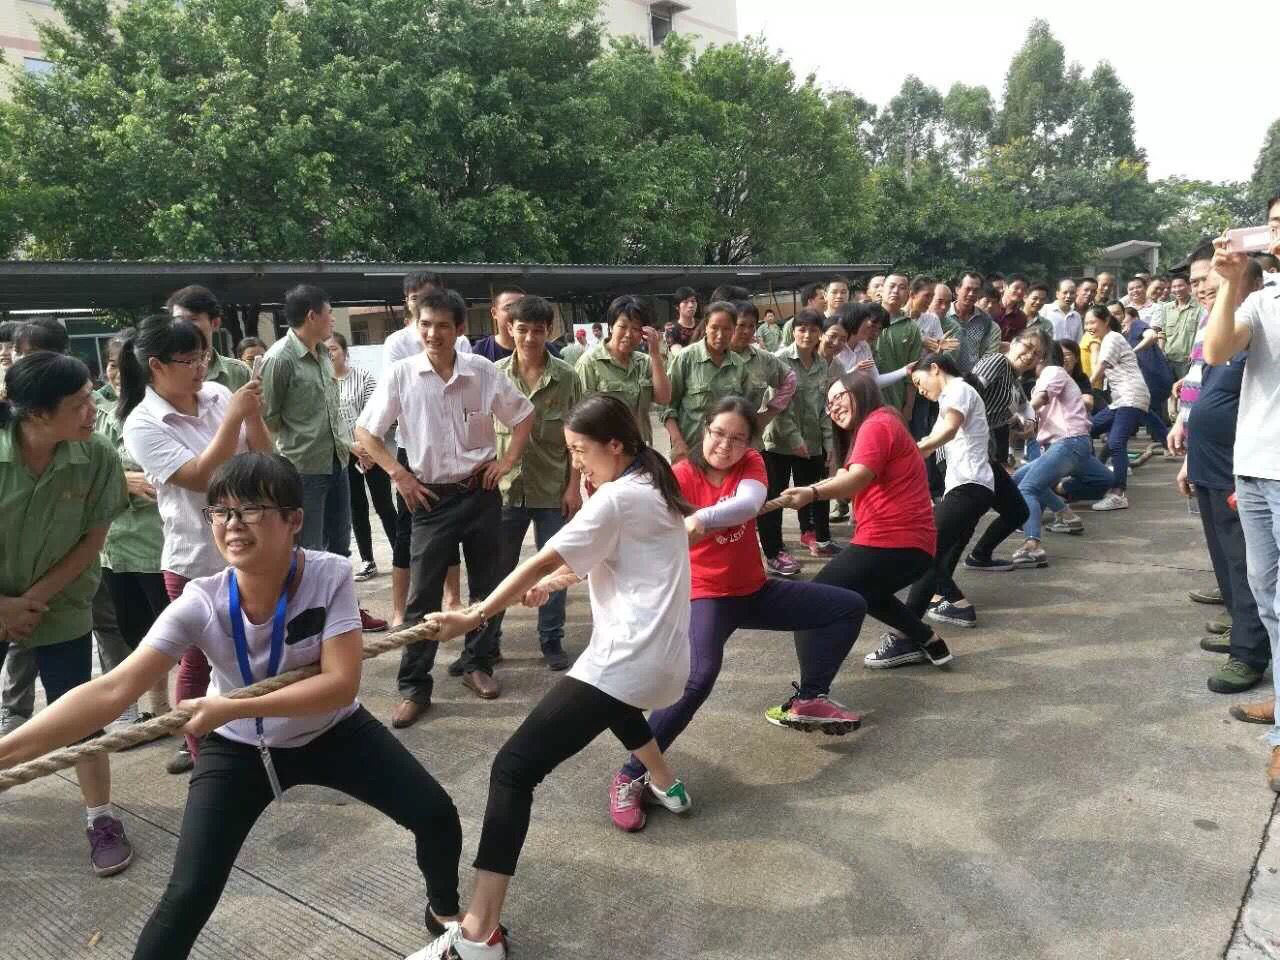 Strong attack in tug-of-war